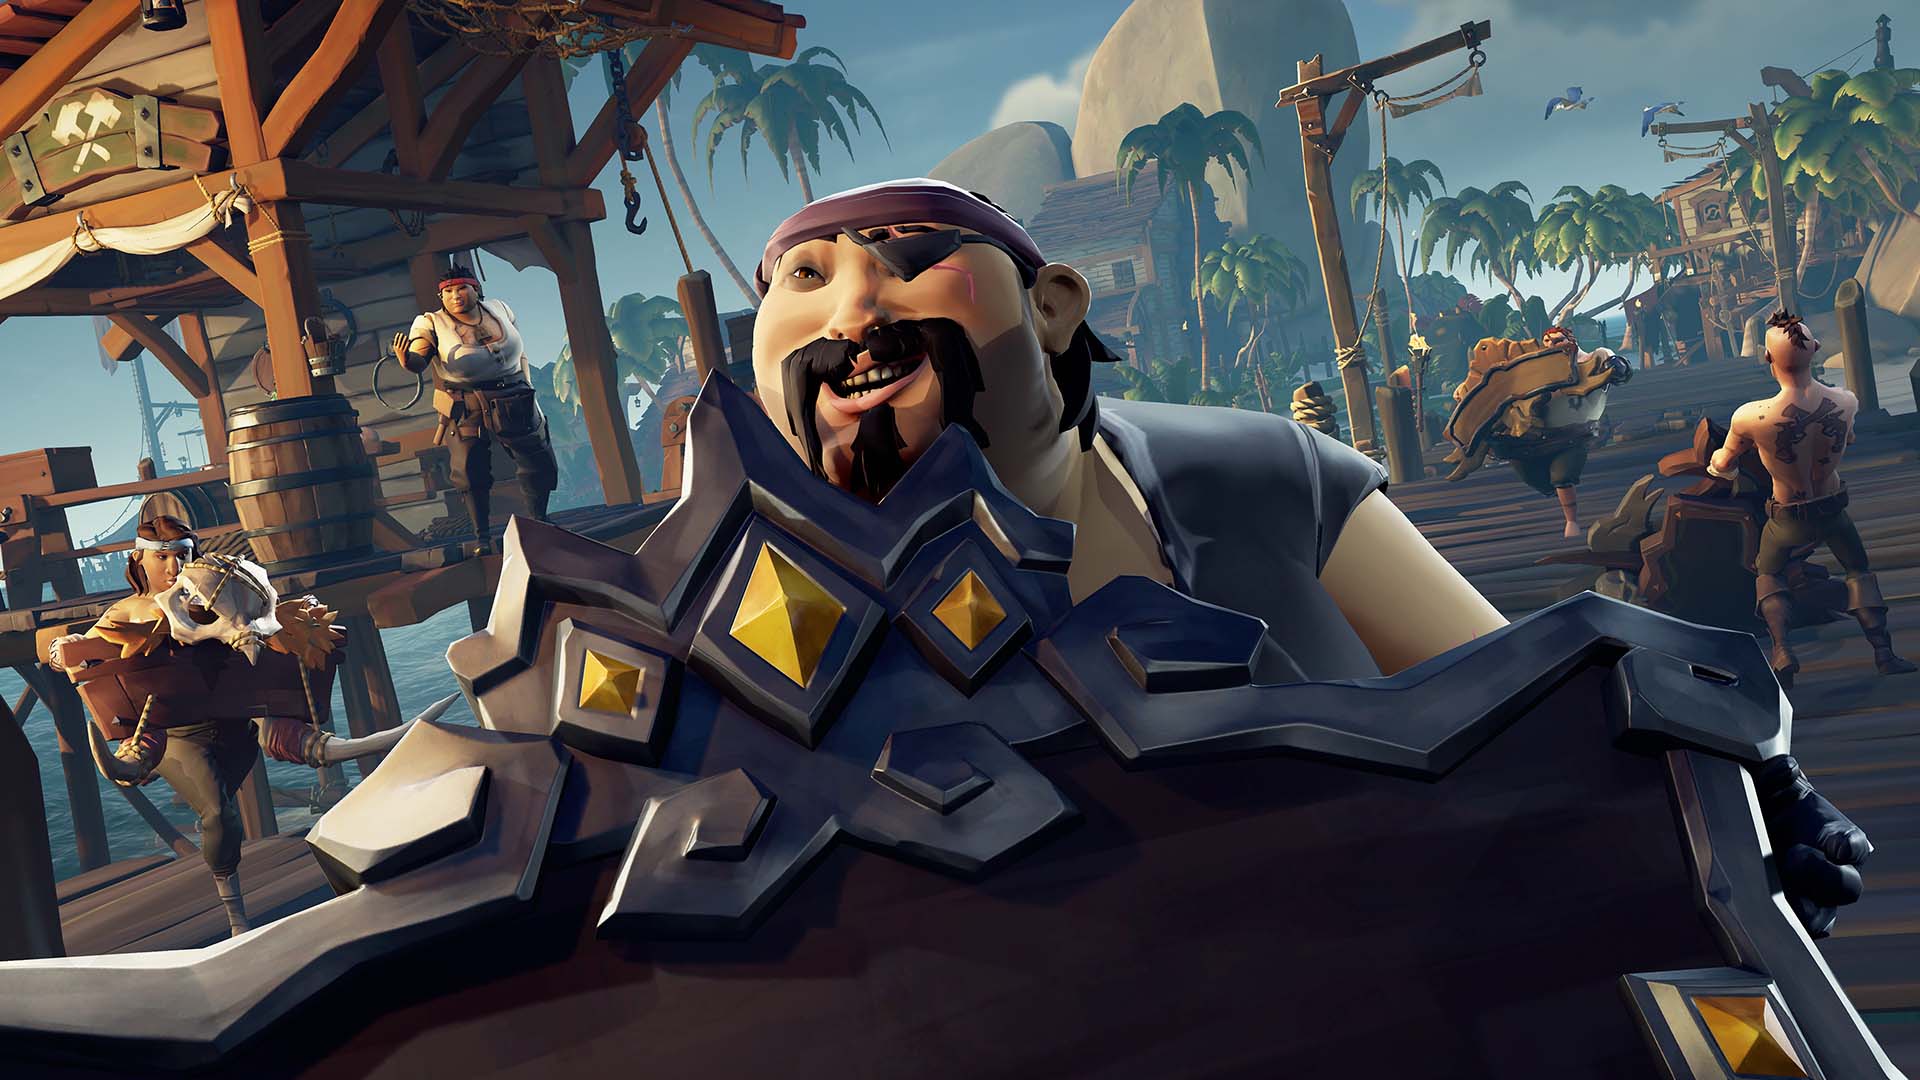 A chunky pirate with a goatee surrounded by friends in Sea of Thieves